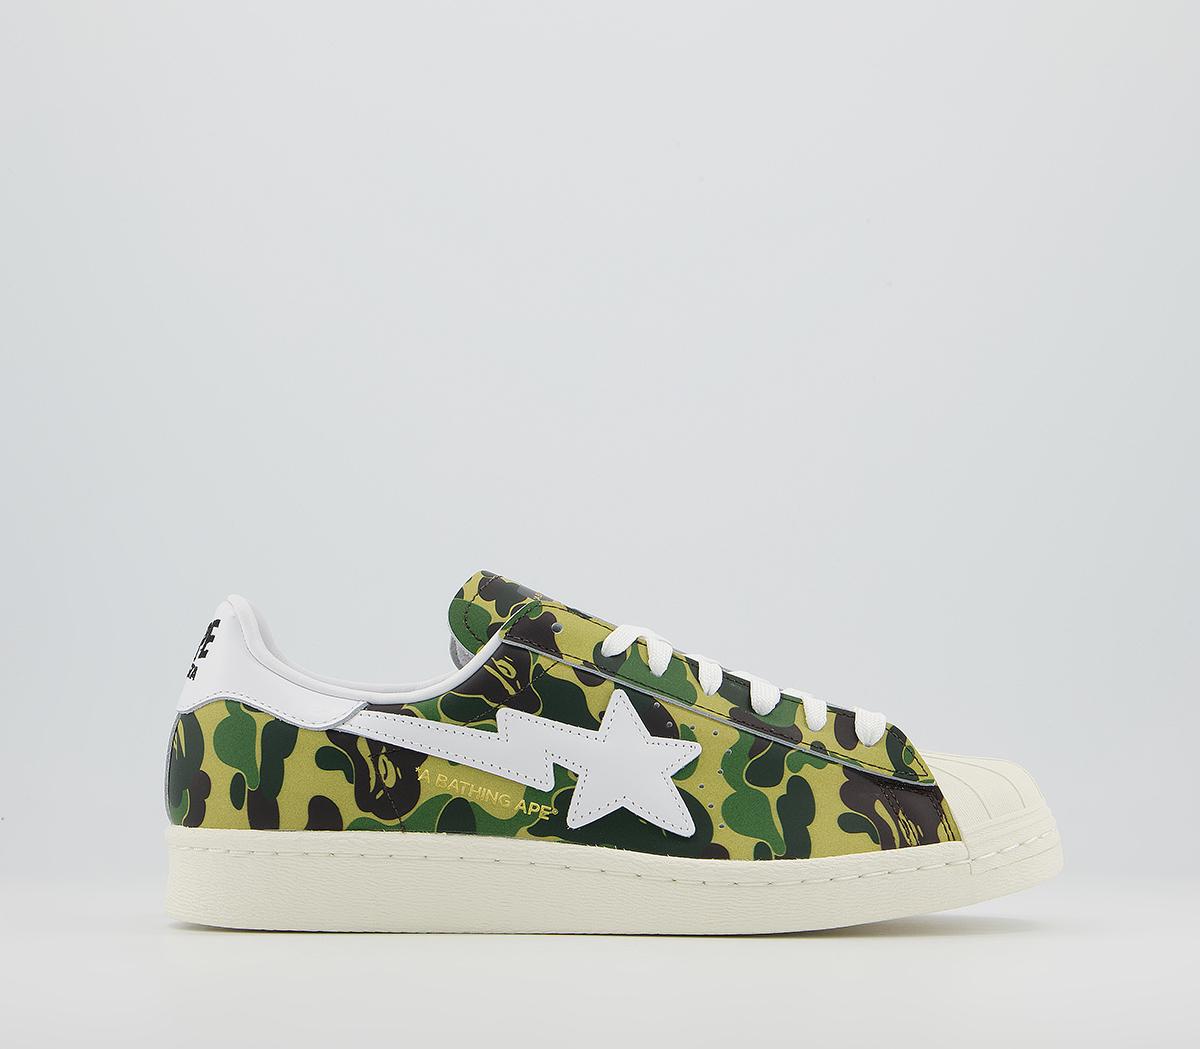 adidas Bape Superstar 80s Trainers Green Camo White - Women's Trainers